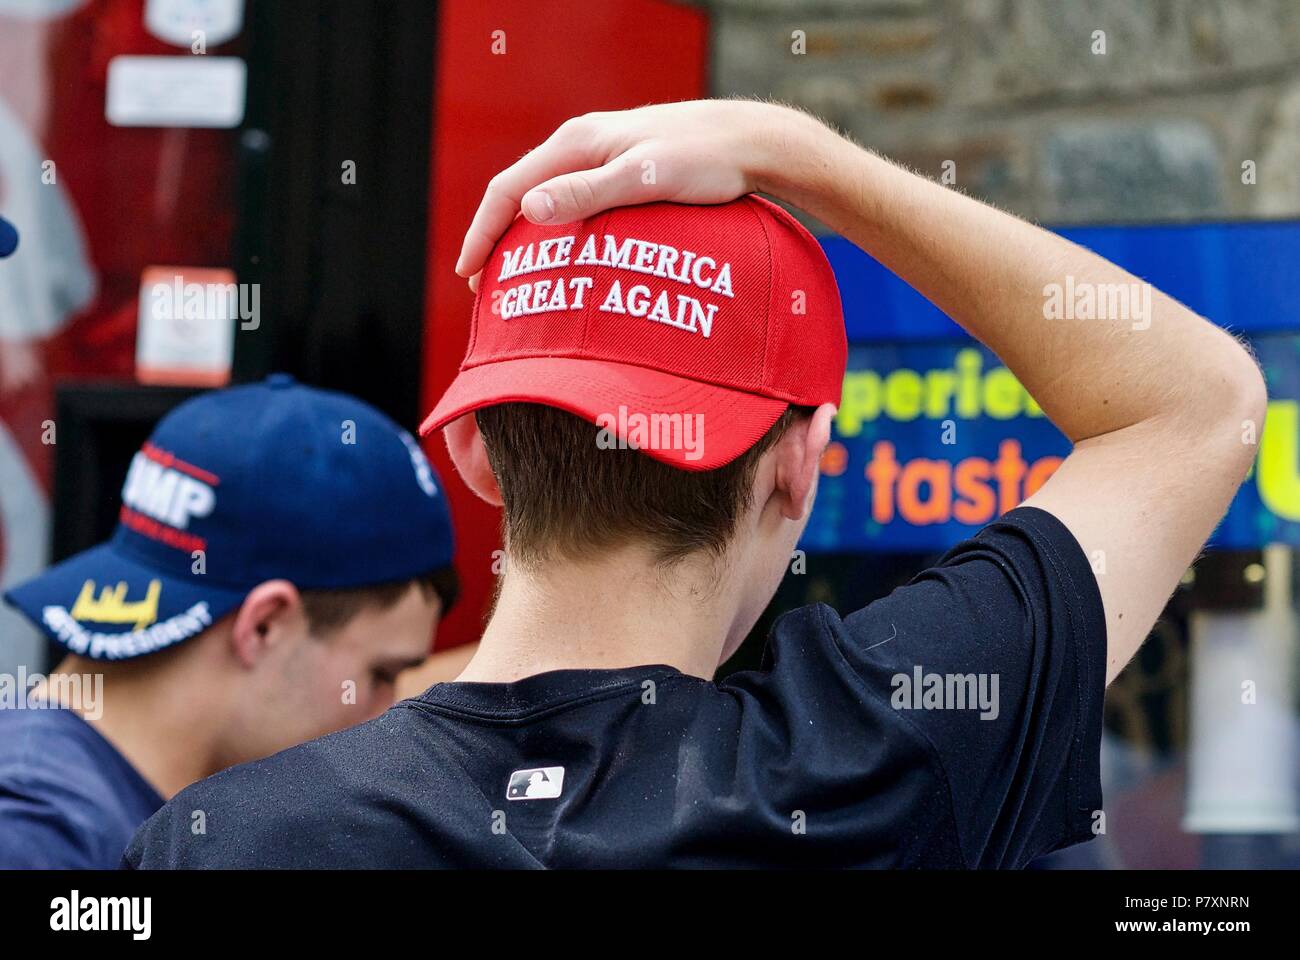 Washington, DC - October 6, 2017: Two young men display their support for President Trump through the MAGA hats they are wearing at the National Zoo. Stock Photo